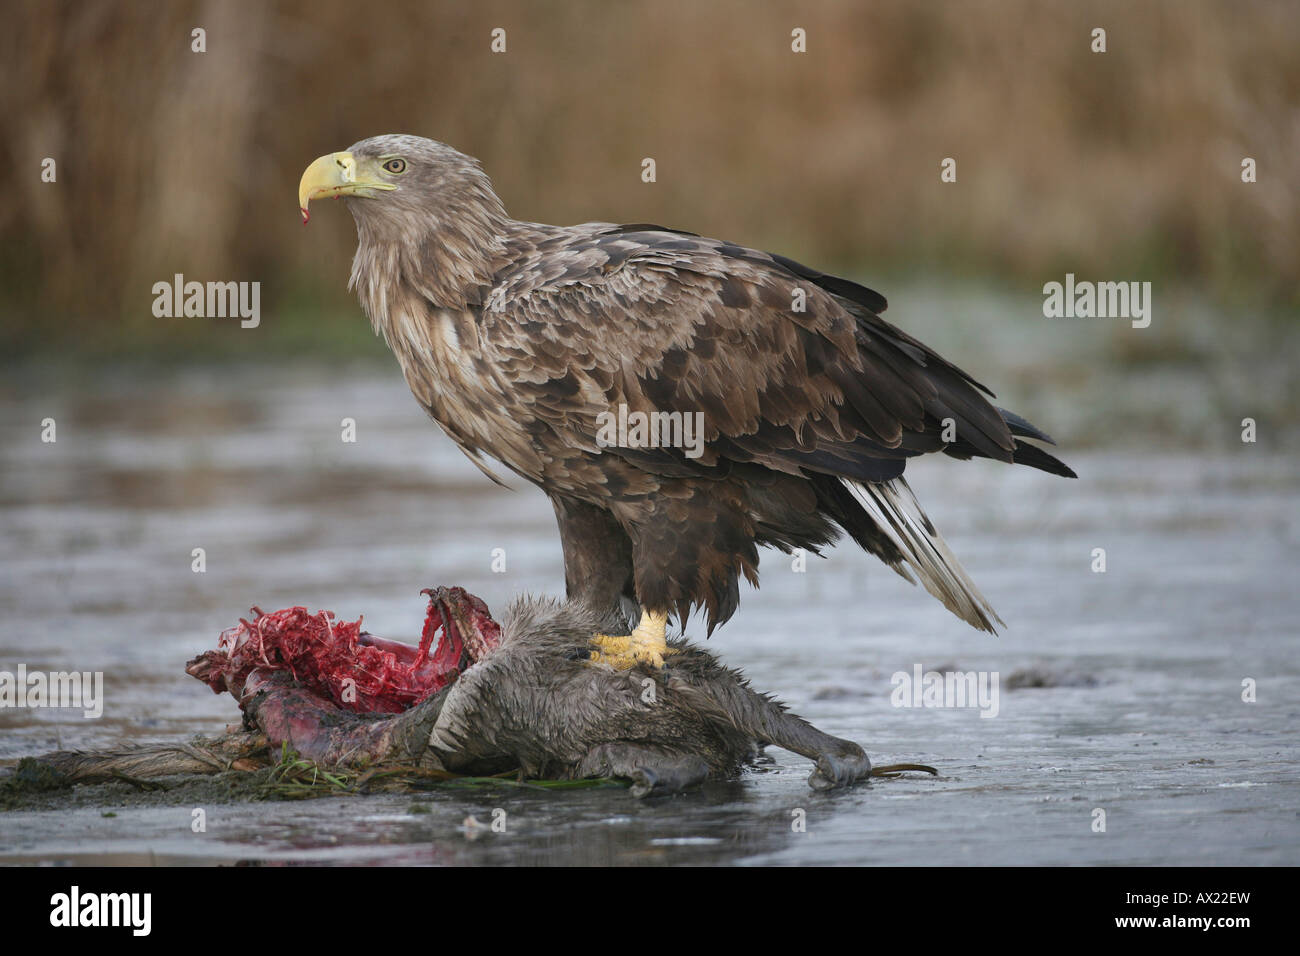 White-tailed Eagle or Sea Eagle (Haliaeetus albicilla) perched on an icy surface, feeding on deer carcass Stock Photo